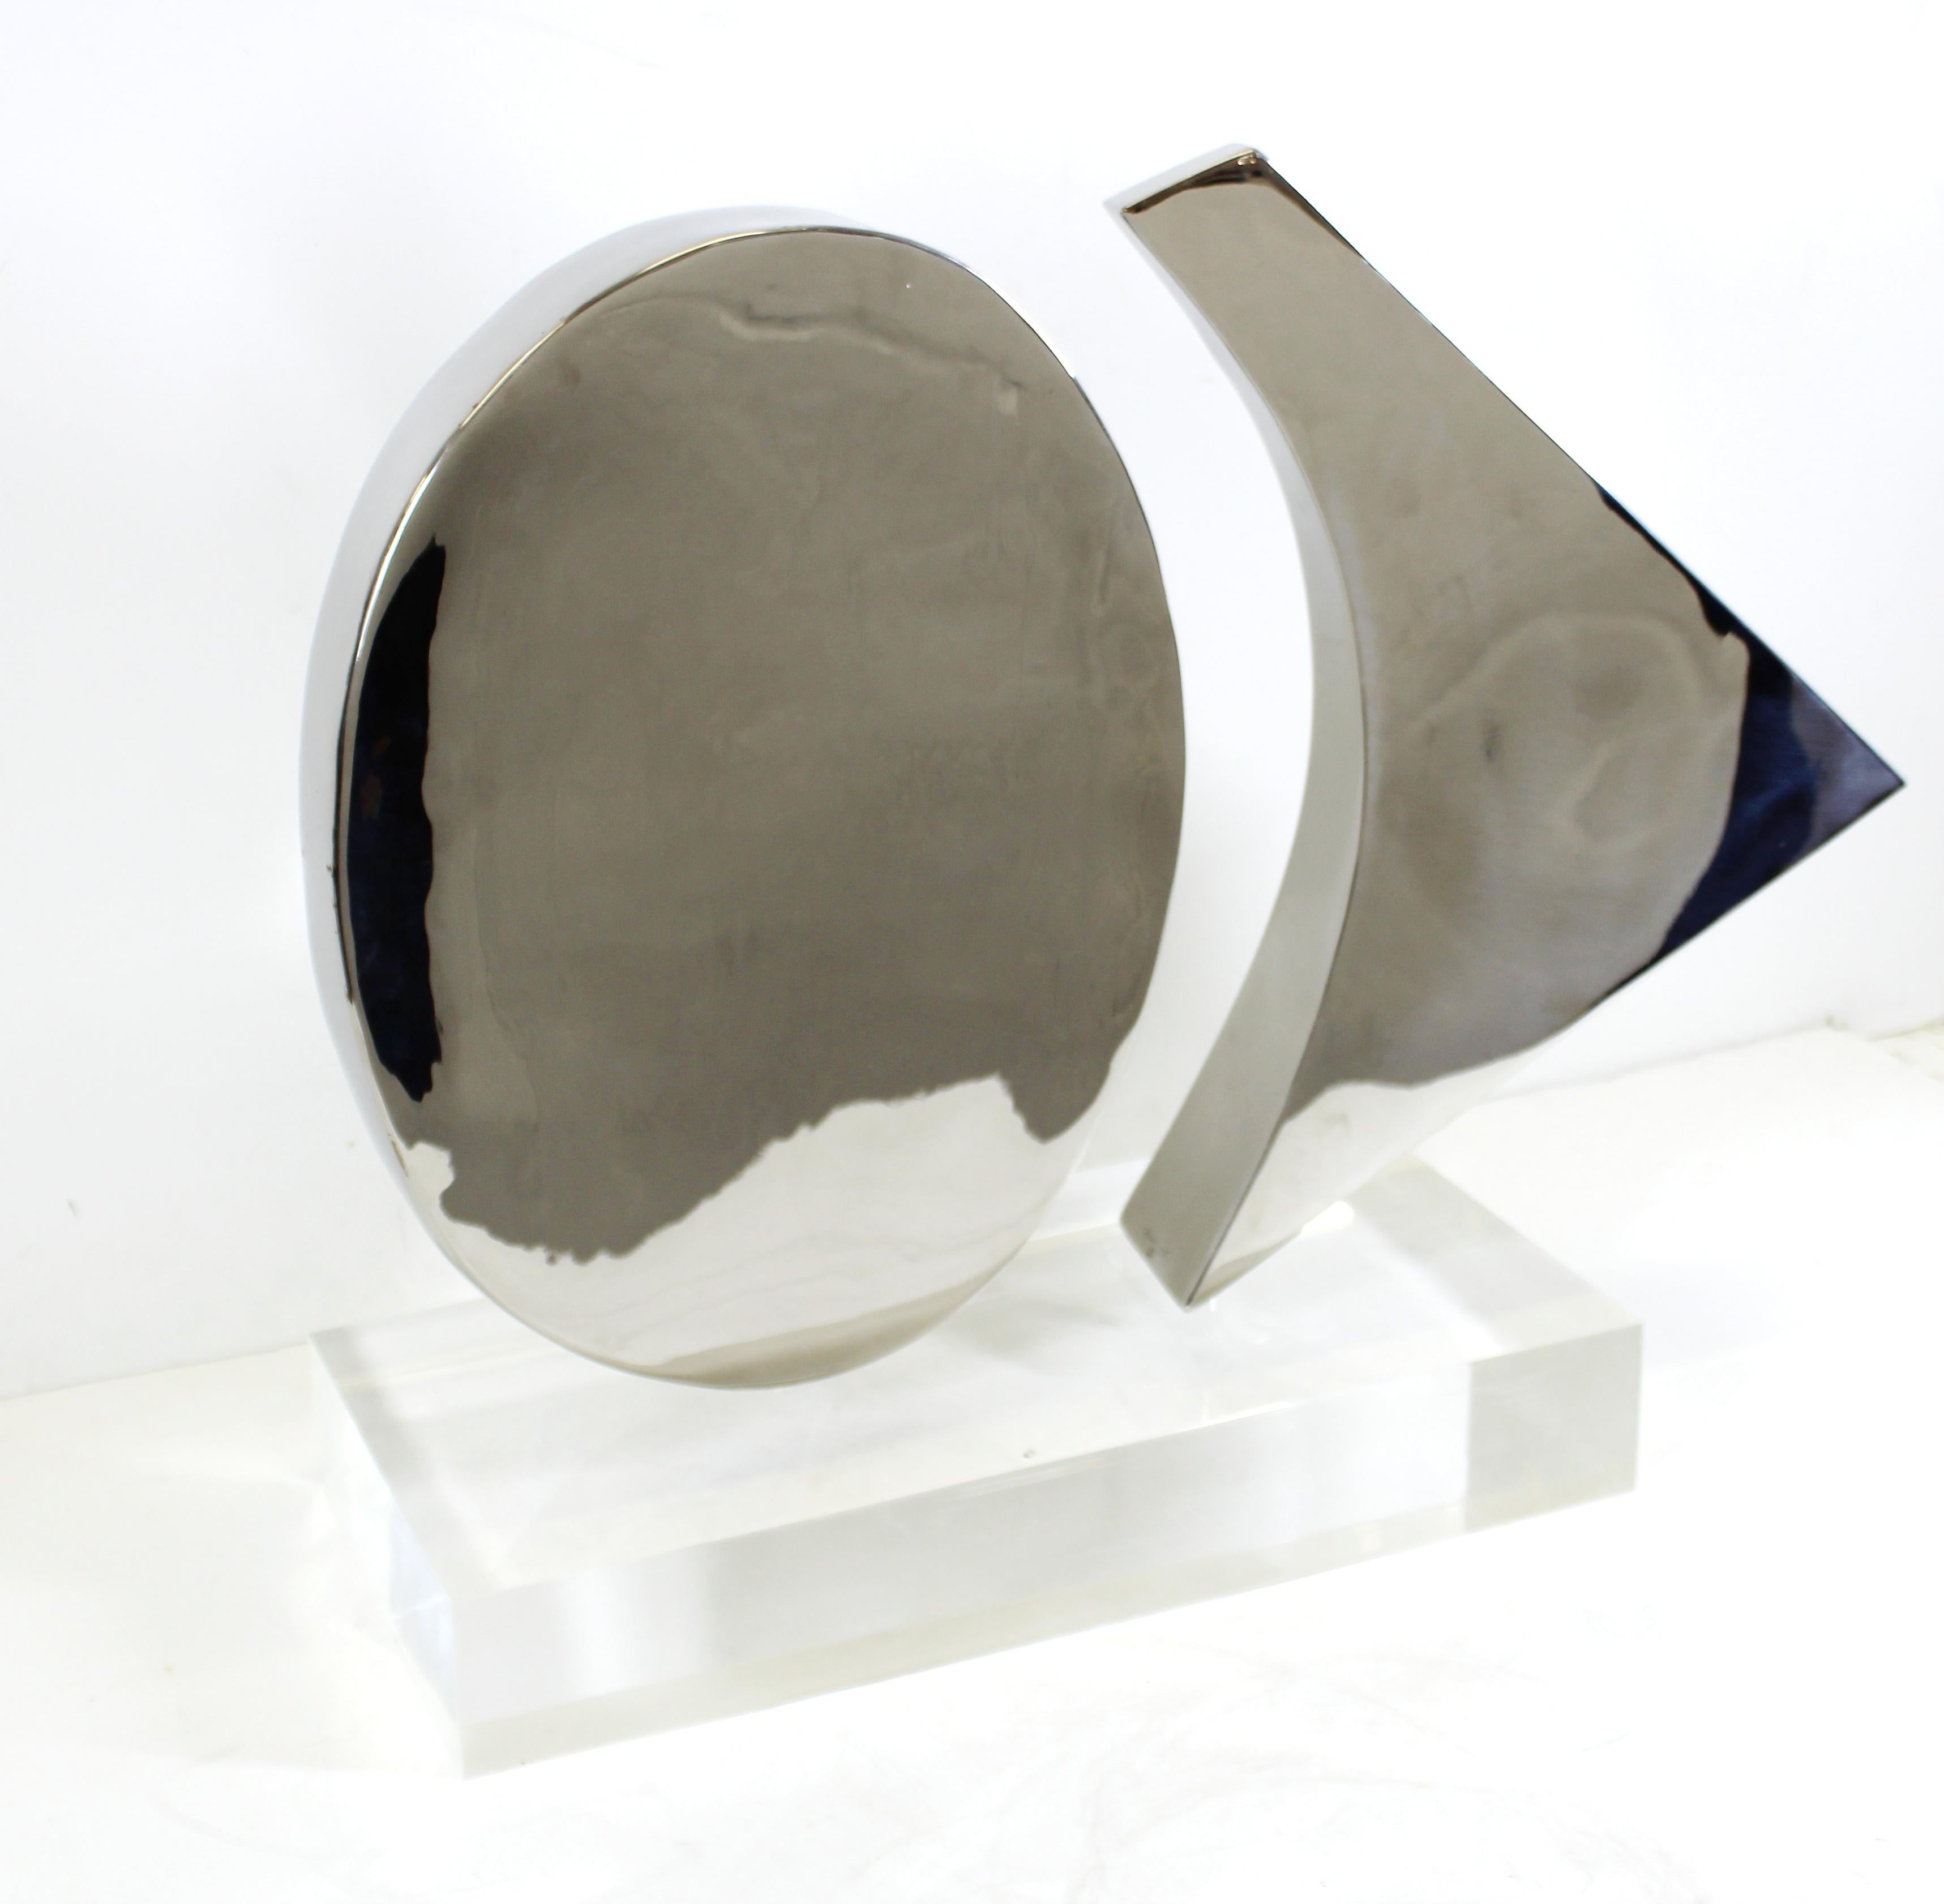 Modern abstract chromed metal sculpture of two rotating shapes mounted on a heavy acrylic base, created by New York artist Harold Sclar (NY 1930-2003), signed and dated 1977. In great vintage condition with age-appropriate wear and use.